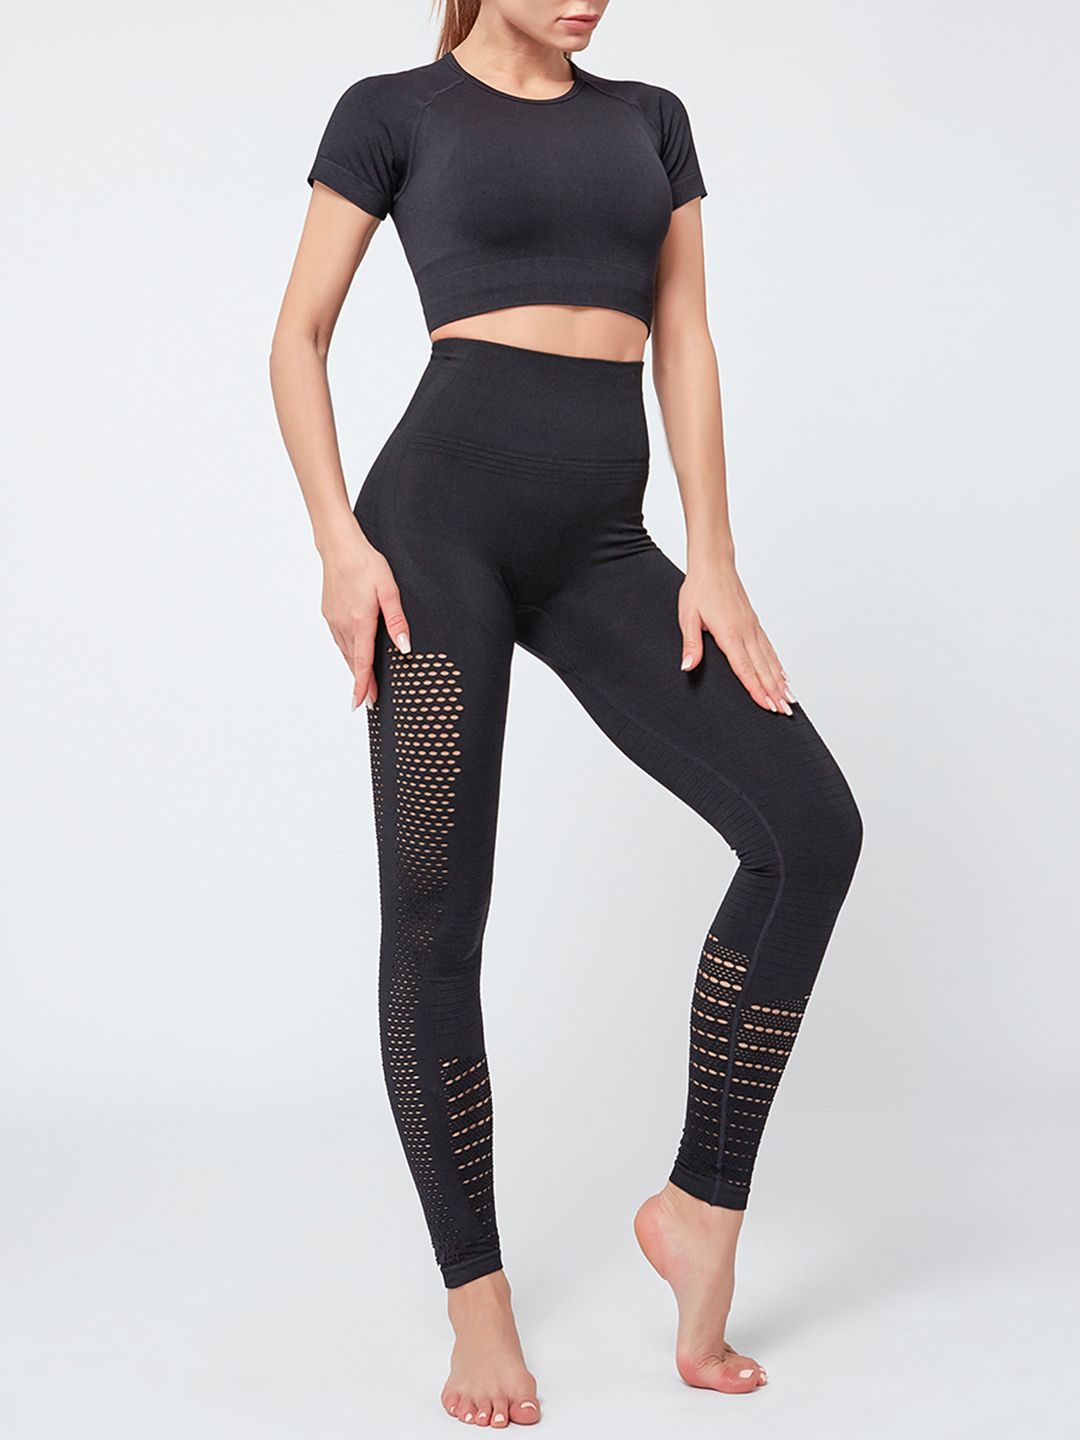 URBANIC Women Black Solid Gym Track Suit with Cut Out Detail Price in India